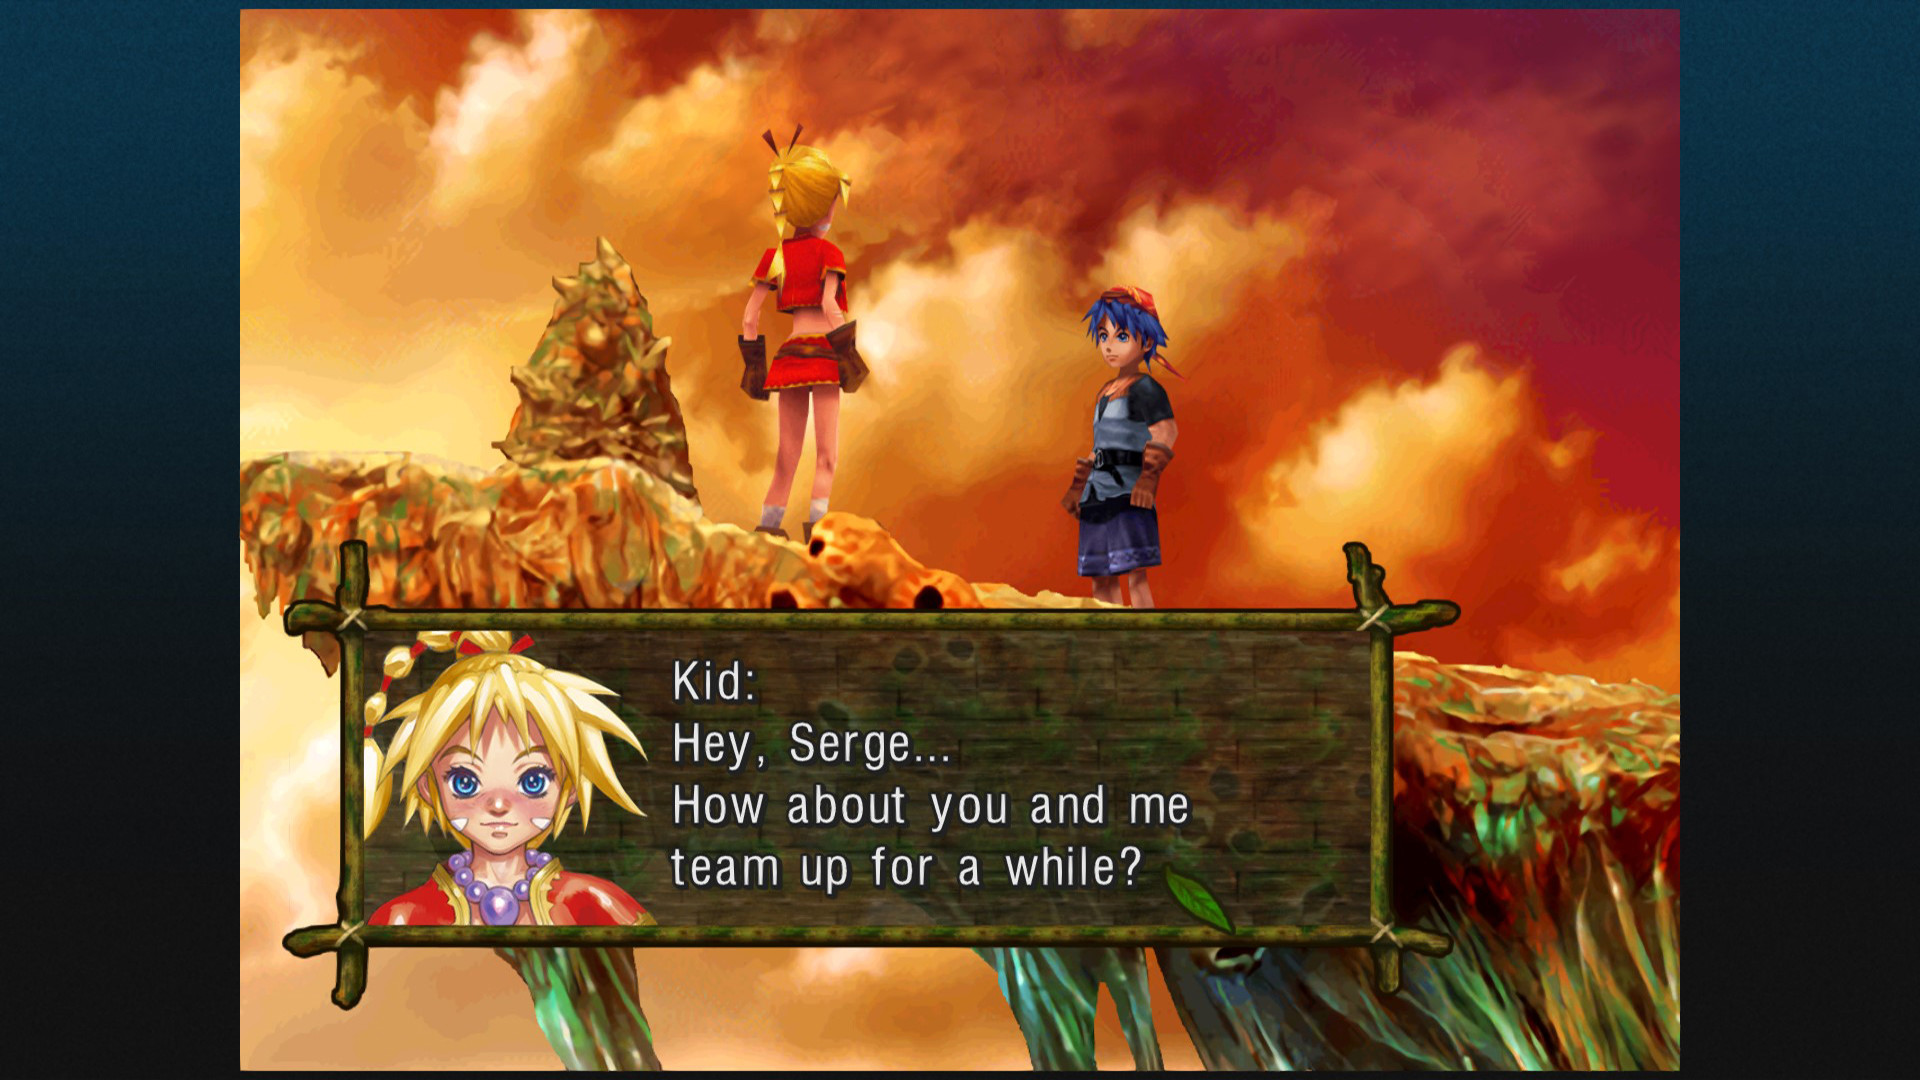 Chrono Cross Director Explained Its Parallel Worlds Happened to 'Create Something New'